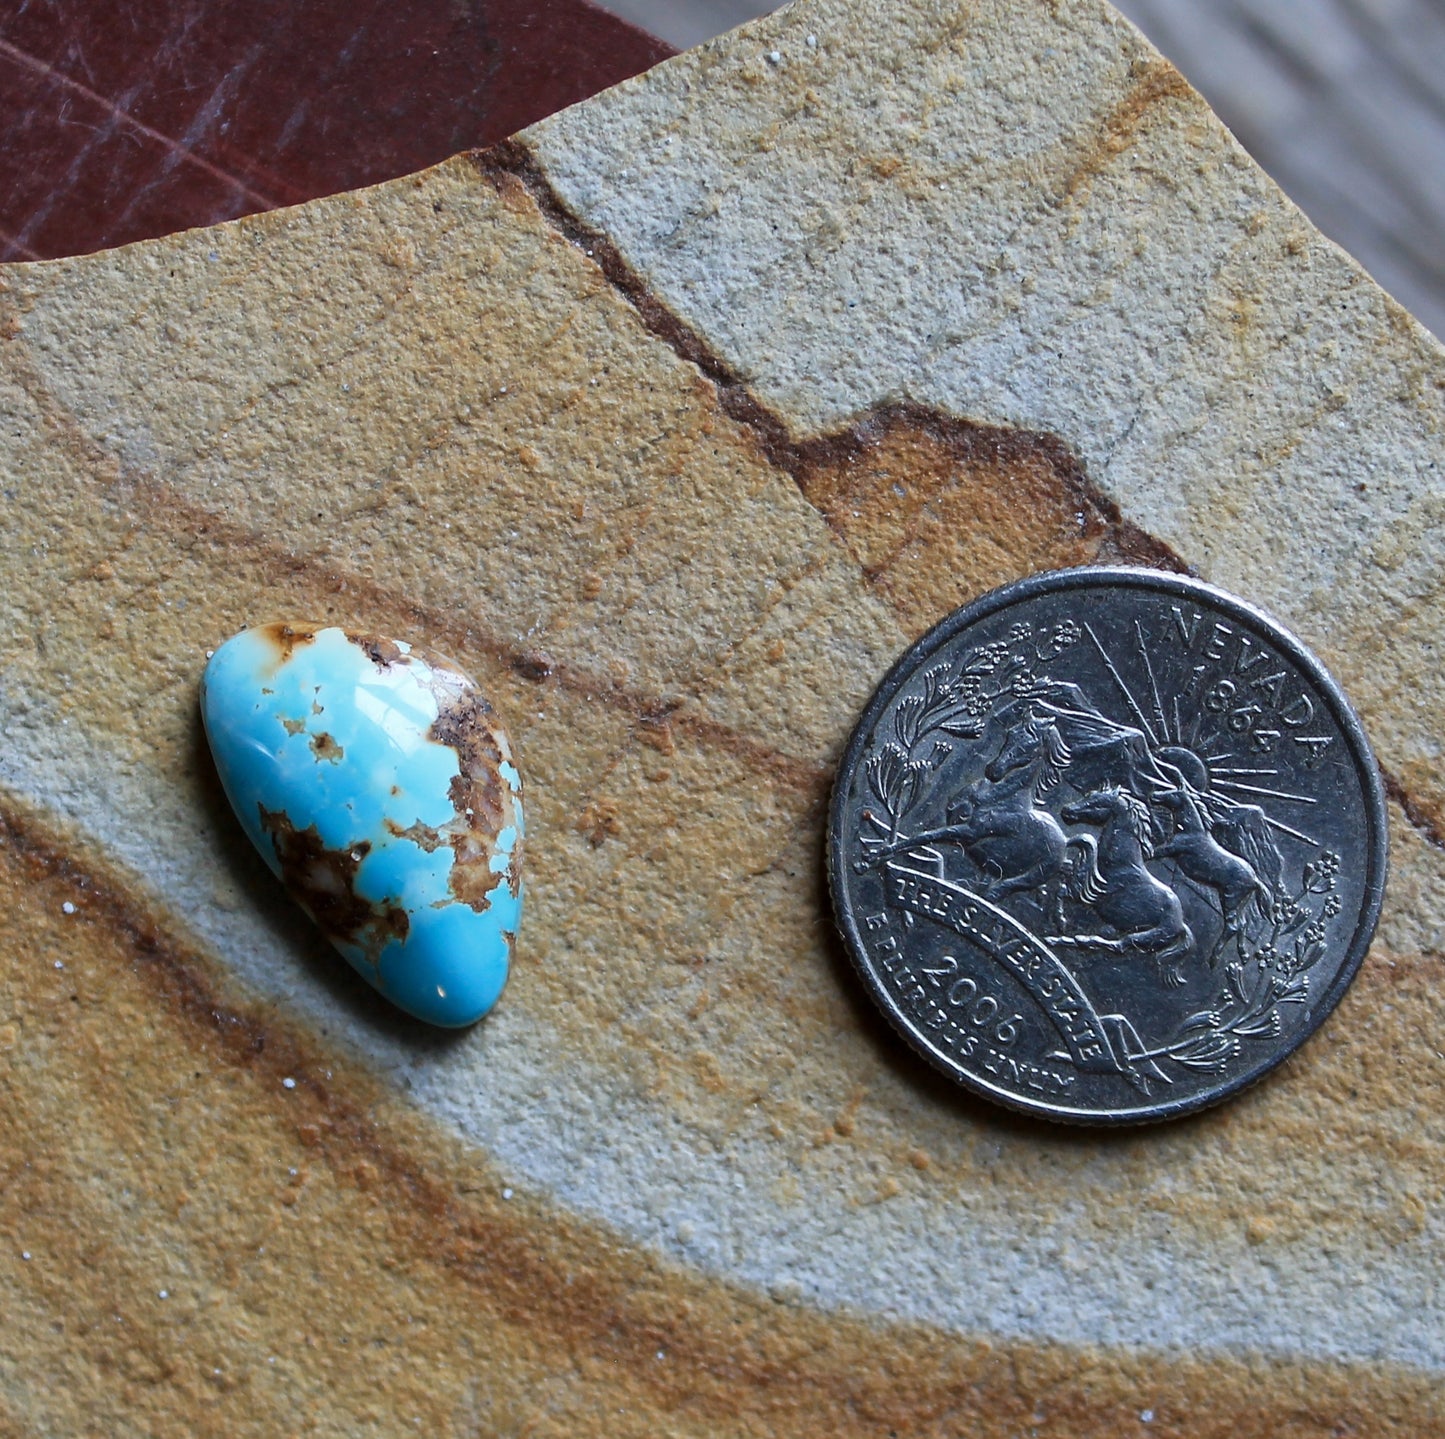 7 carat light blue Stone Mountain Turquoise cabochon with red matrix